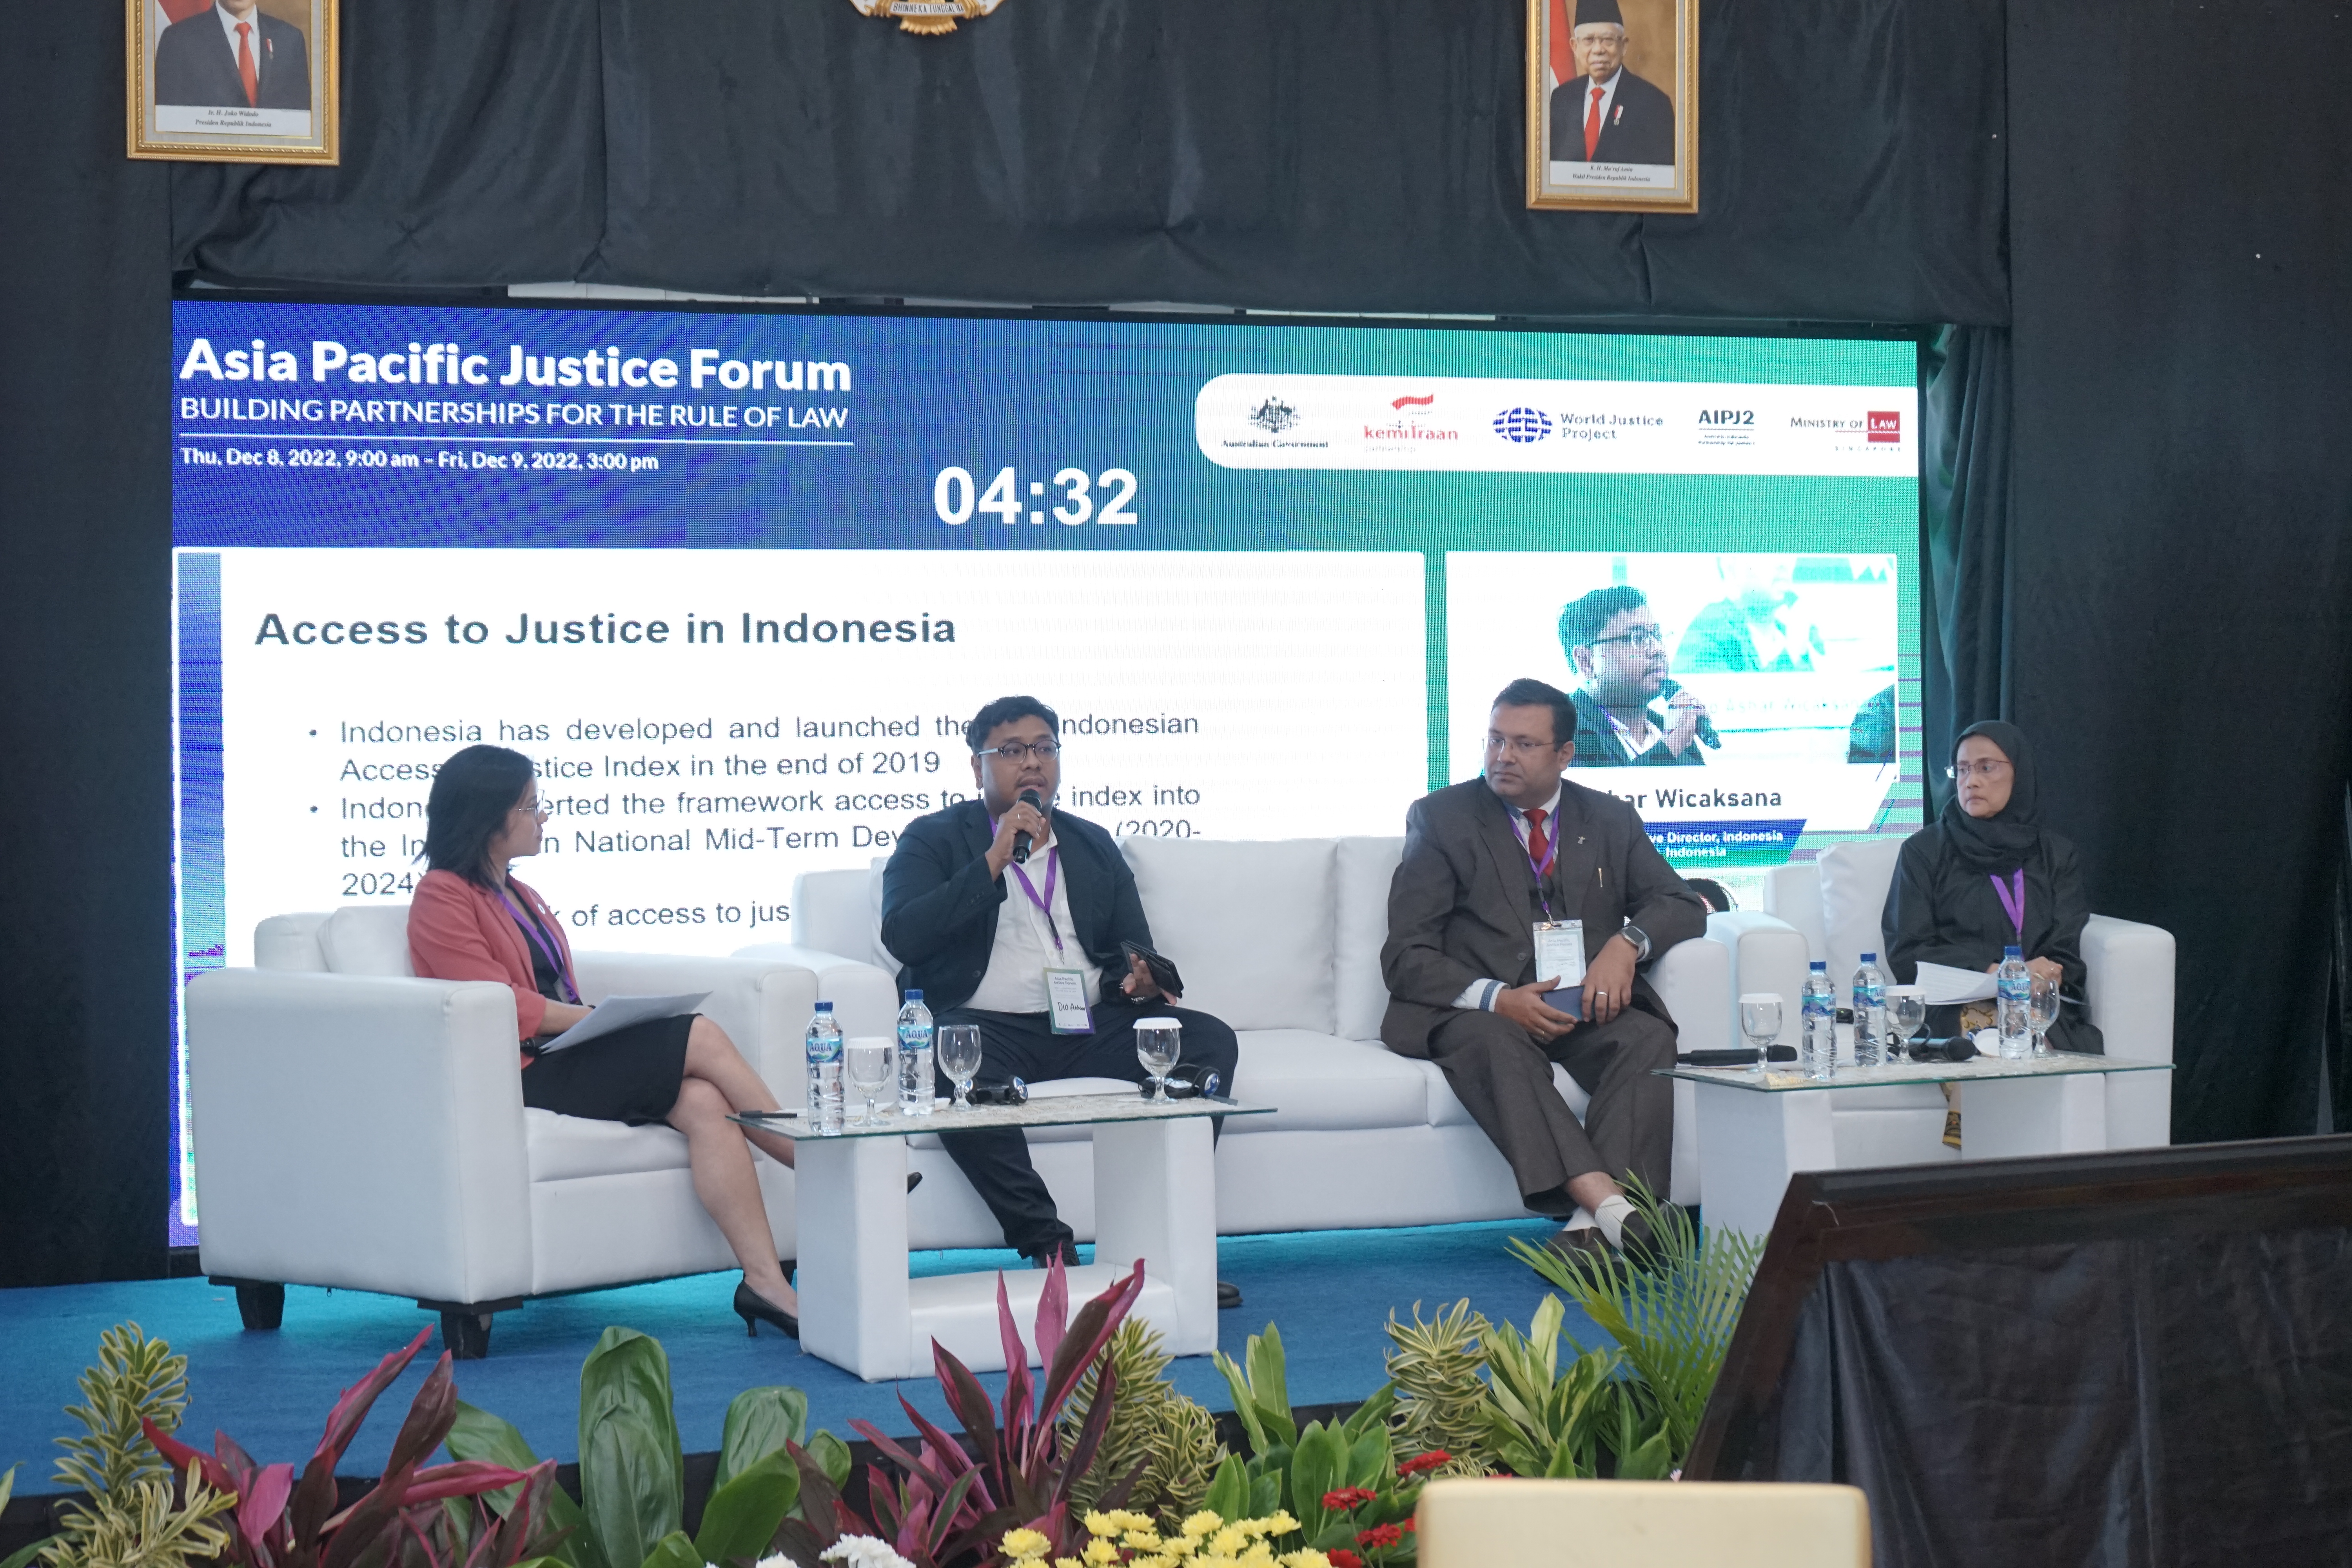 Discussion as part of the Interactive Session on Access to Justice for Minorities during the World Justice Project's Asia Pacific Justice Forum